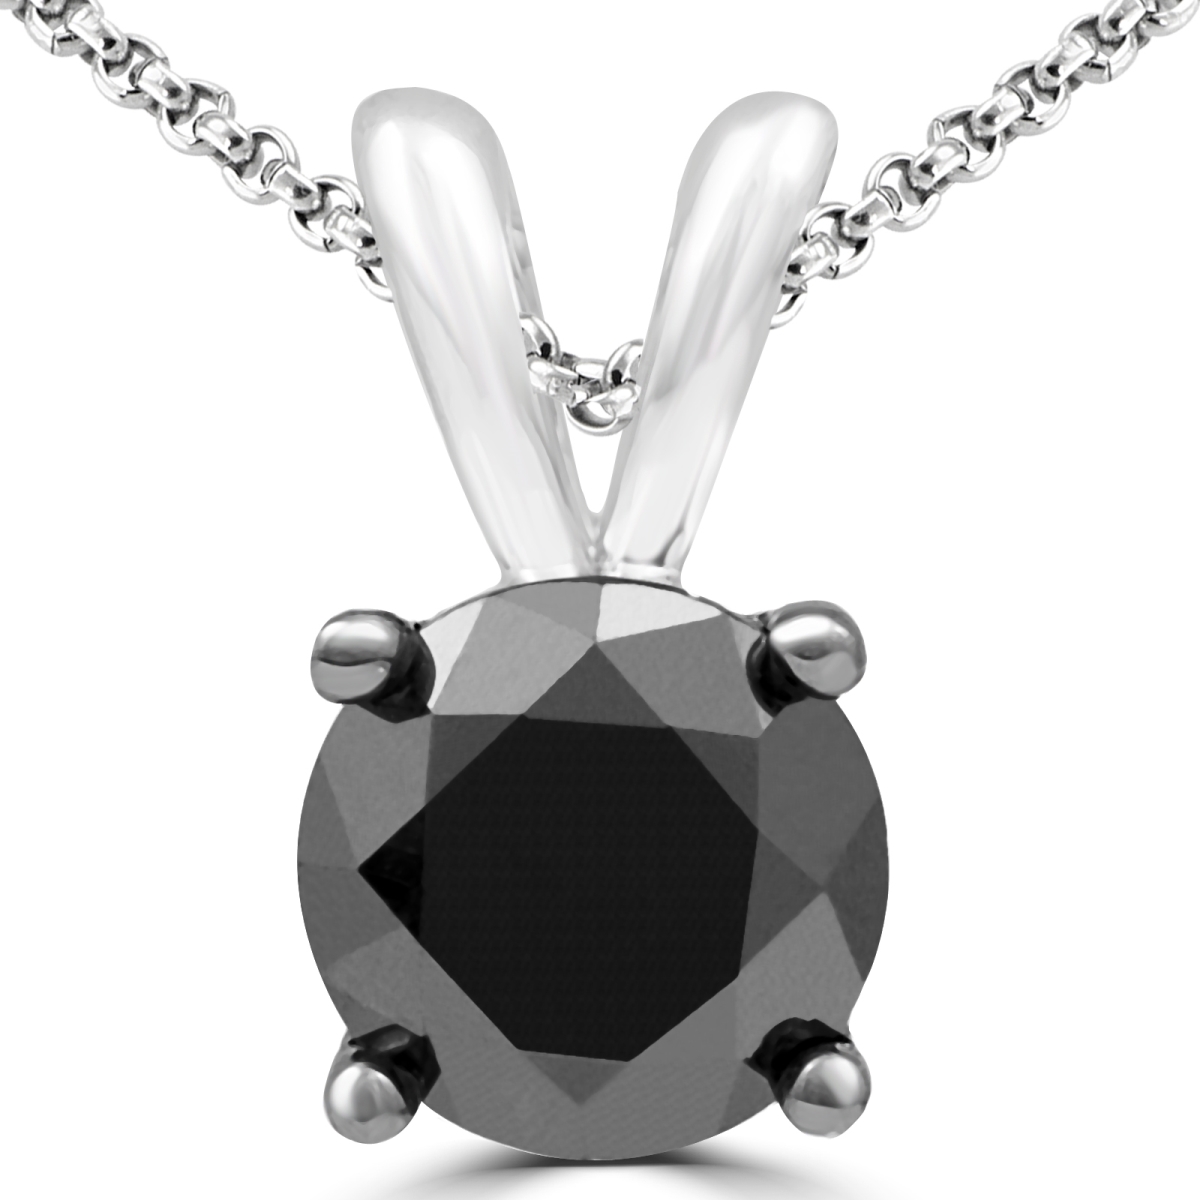 Mdr170028 1.5 Ct Round Black Diamond 4 Prong Solitaire Pendant Necklace In 10k